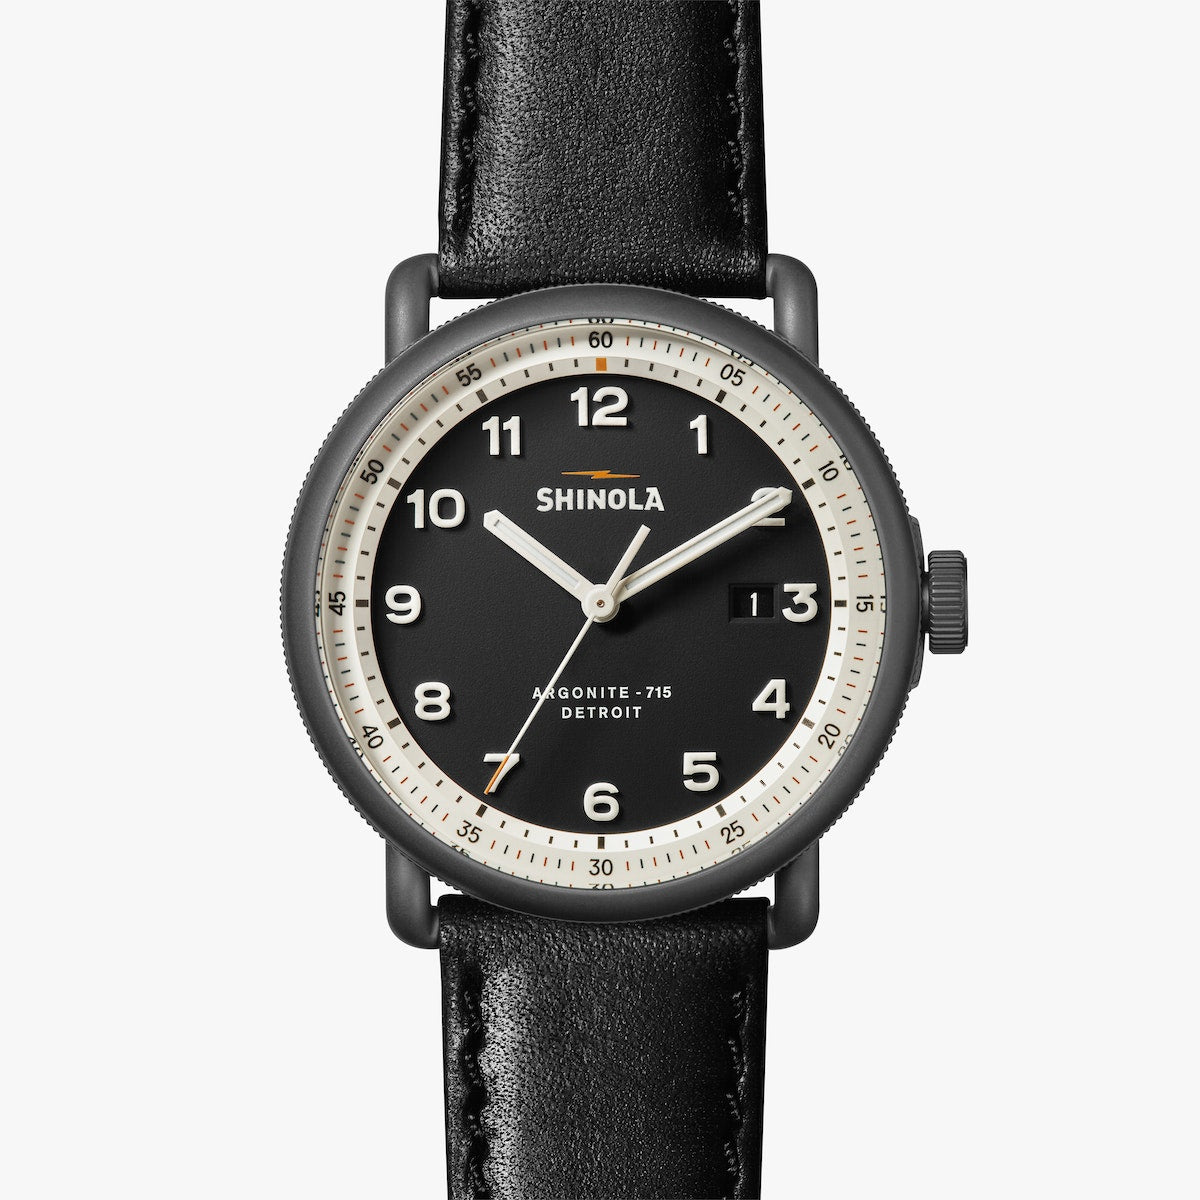 THE CANFIELD MODEL C56 43MM